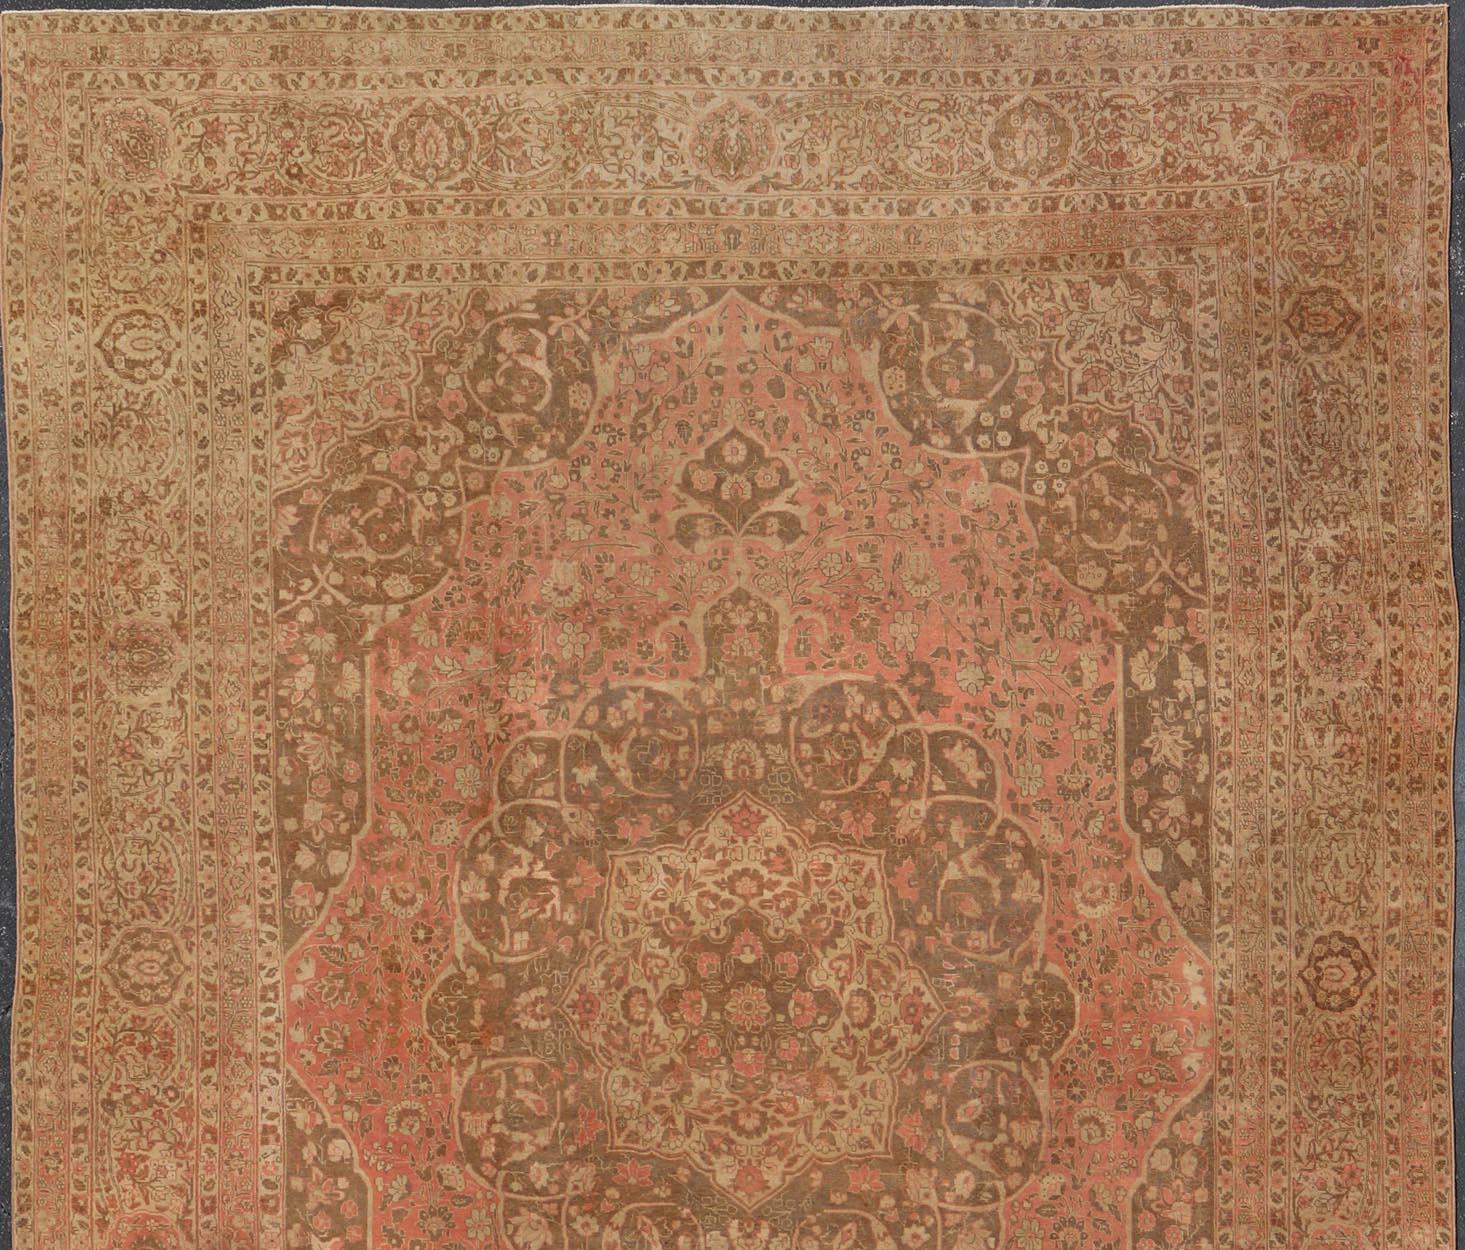 Antique Medallion Tabriz Carpet in Pink, Light Brown, Camel, Taupe, and Salmon. Keivan Woven Arts / rug E-0303, country of origin / type: Iran /Tabriz, circa 1890.
Measures: 12'10 x 17'9.
This magnificent antique Tabriz carpet beautifully